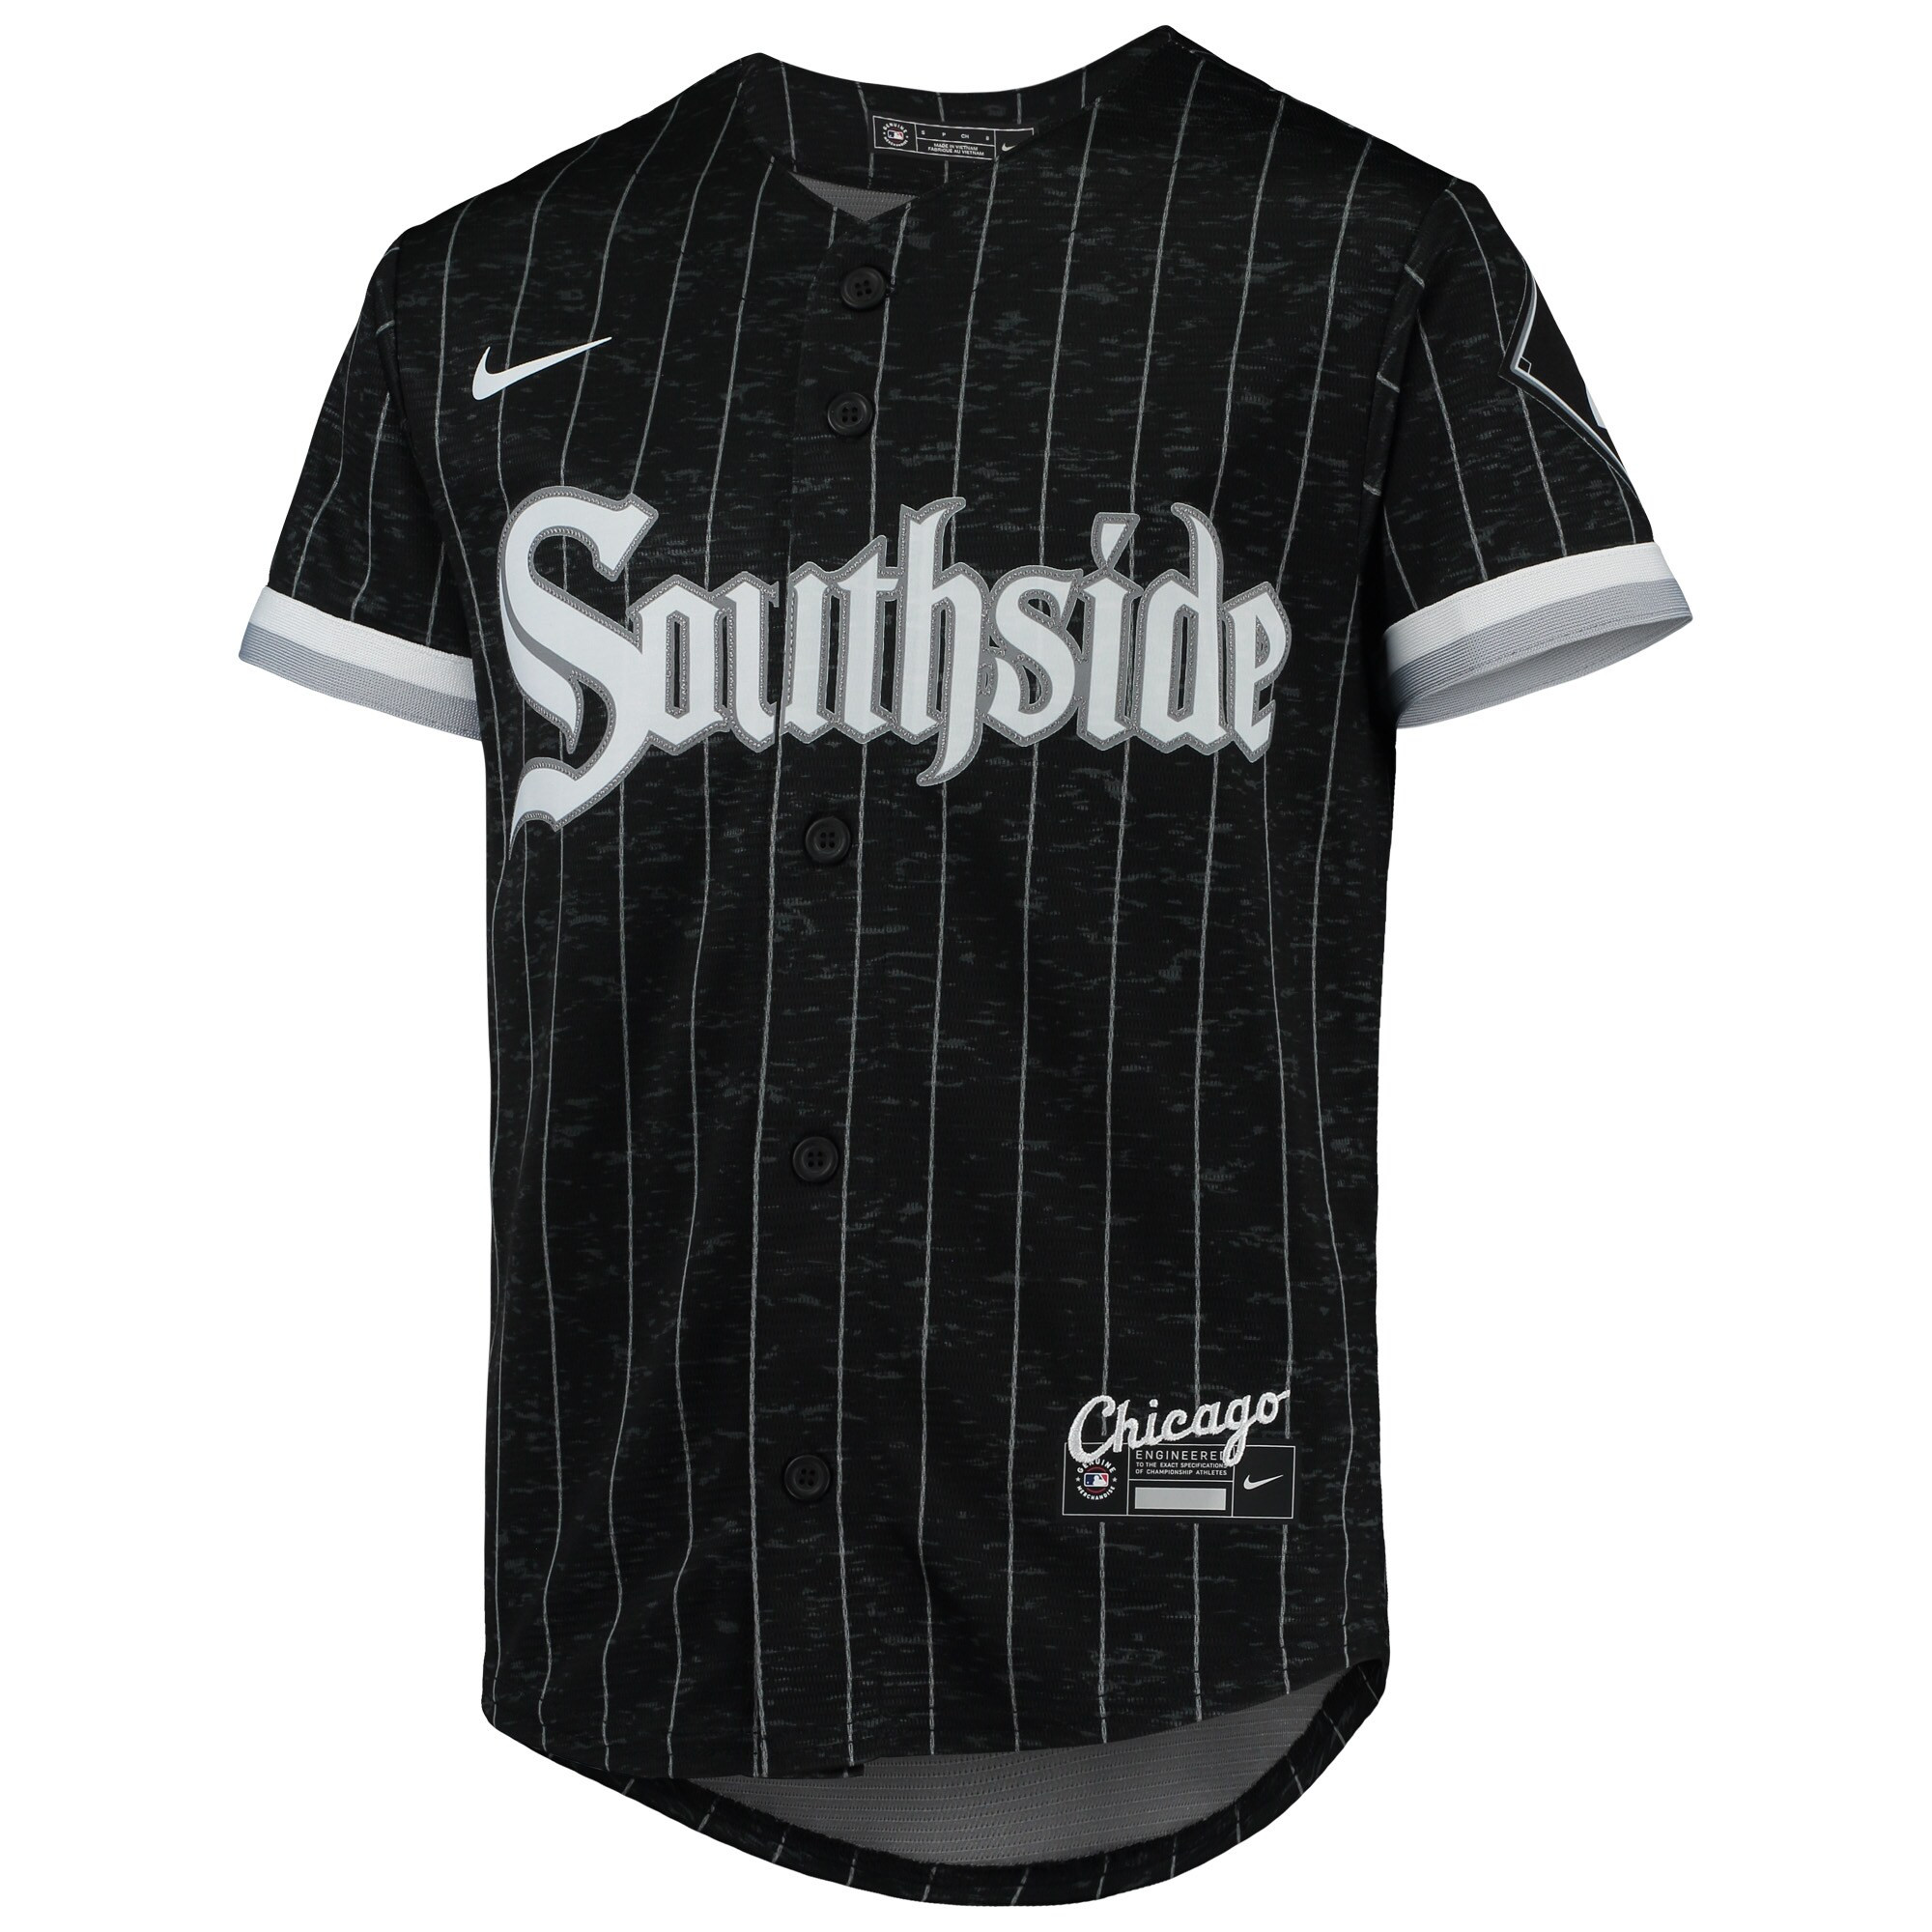 Tim Anderson Chicago White Sox Youth City Connect Replica Player Jersey - Black